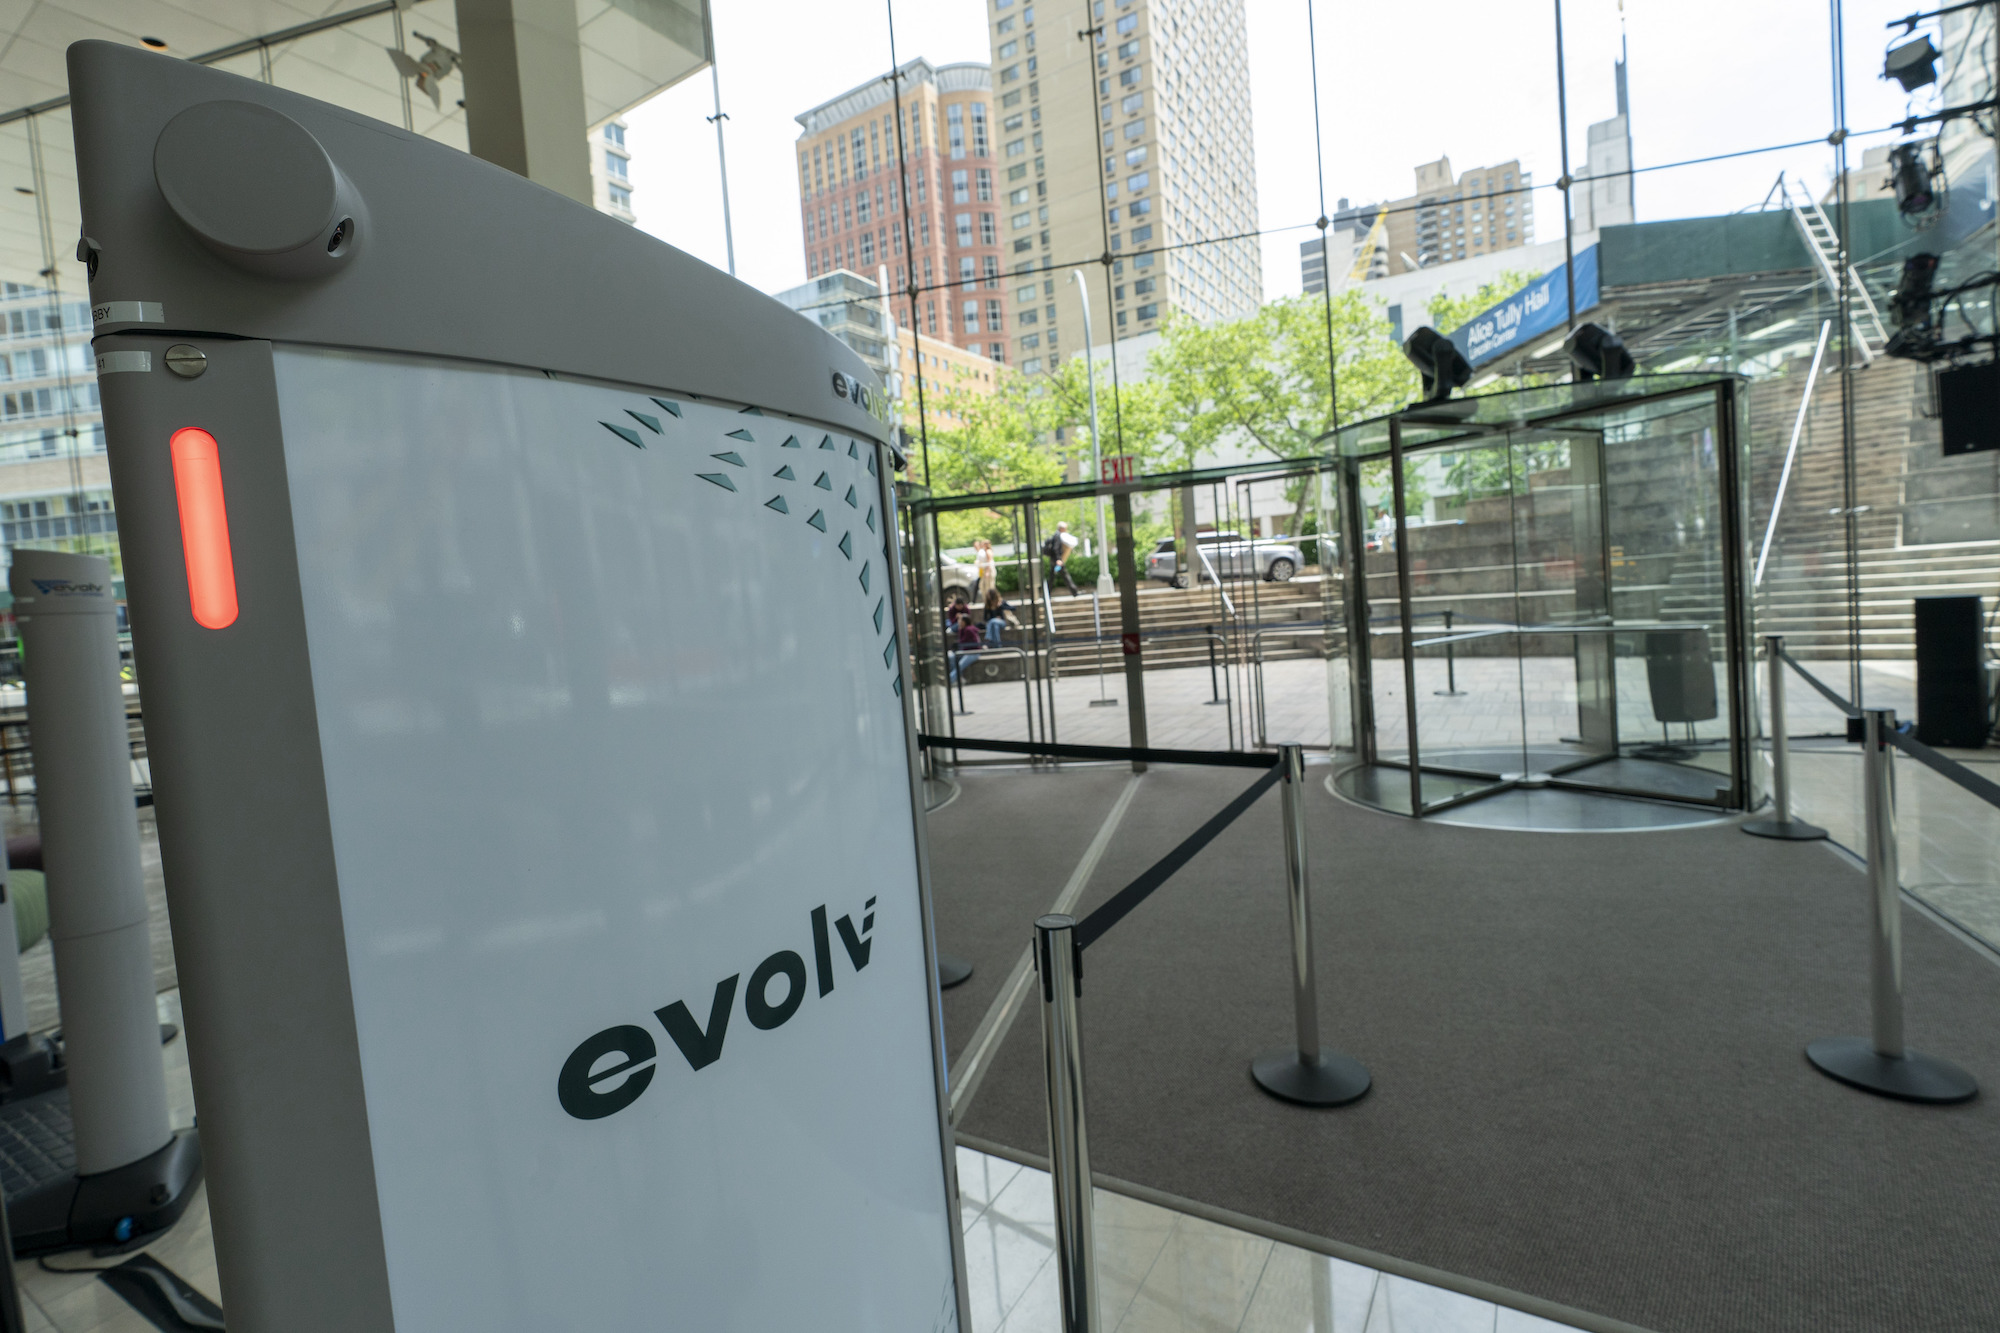 The Evolv Express weapons detection system.